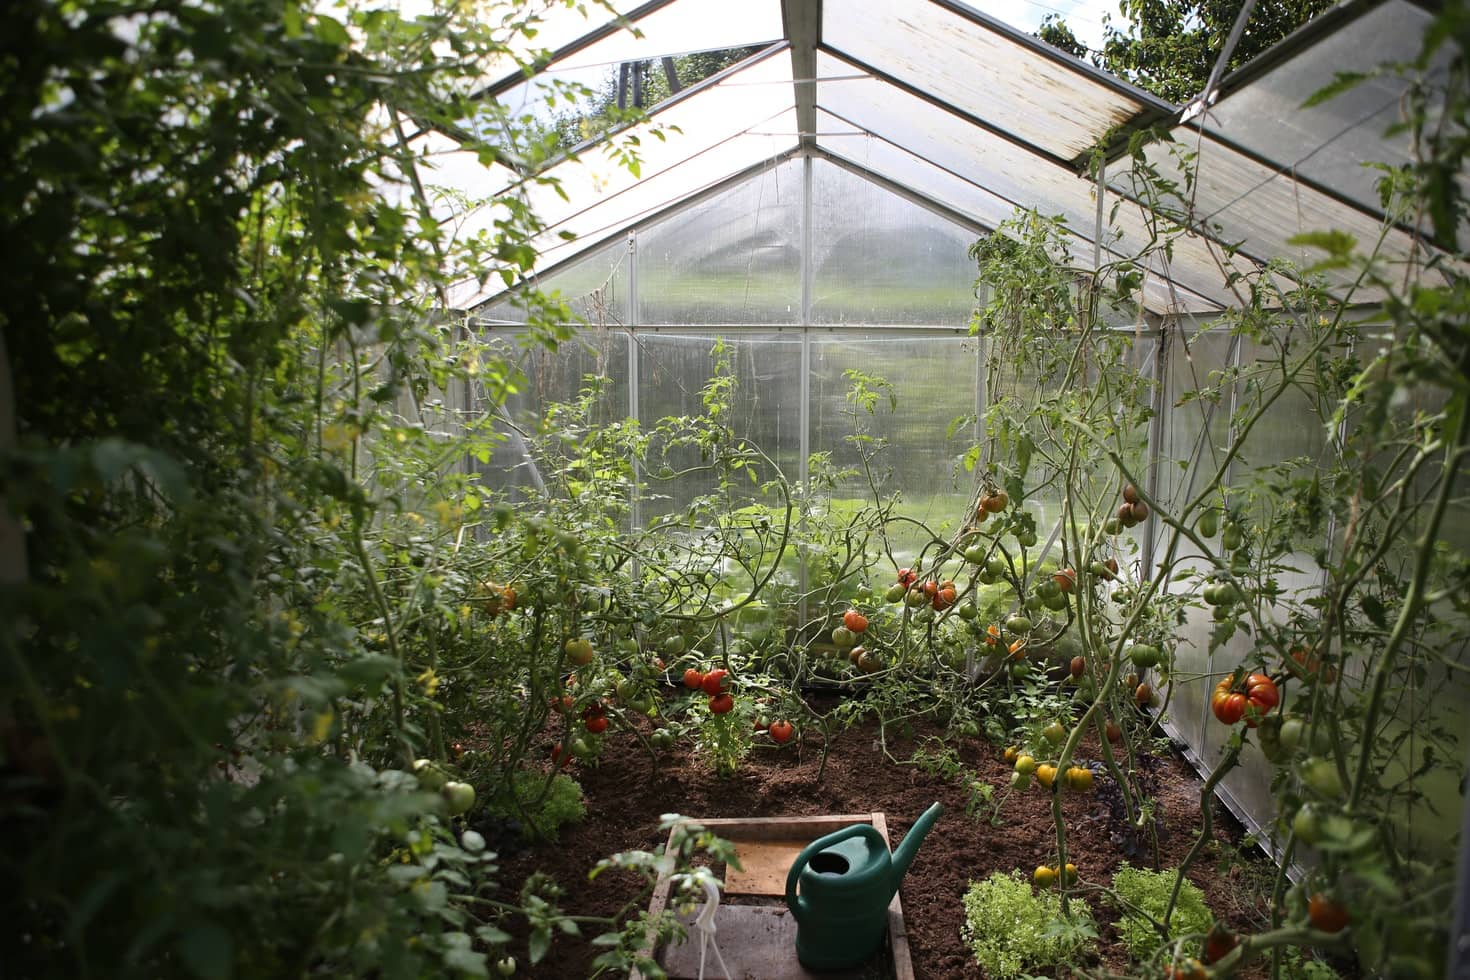 Tomatoes growing in a green house